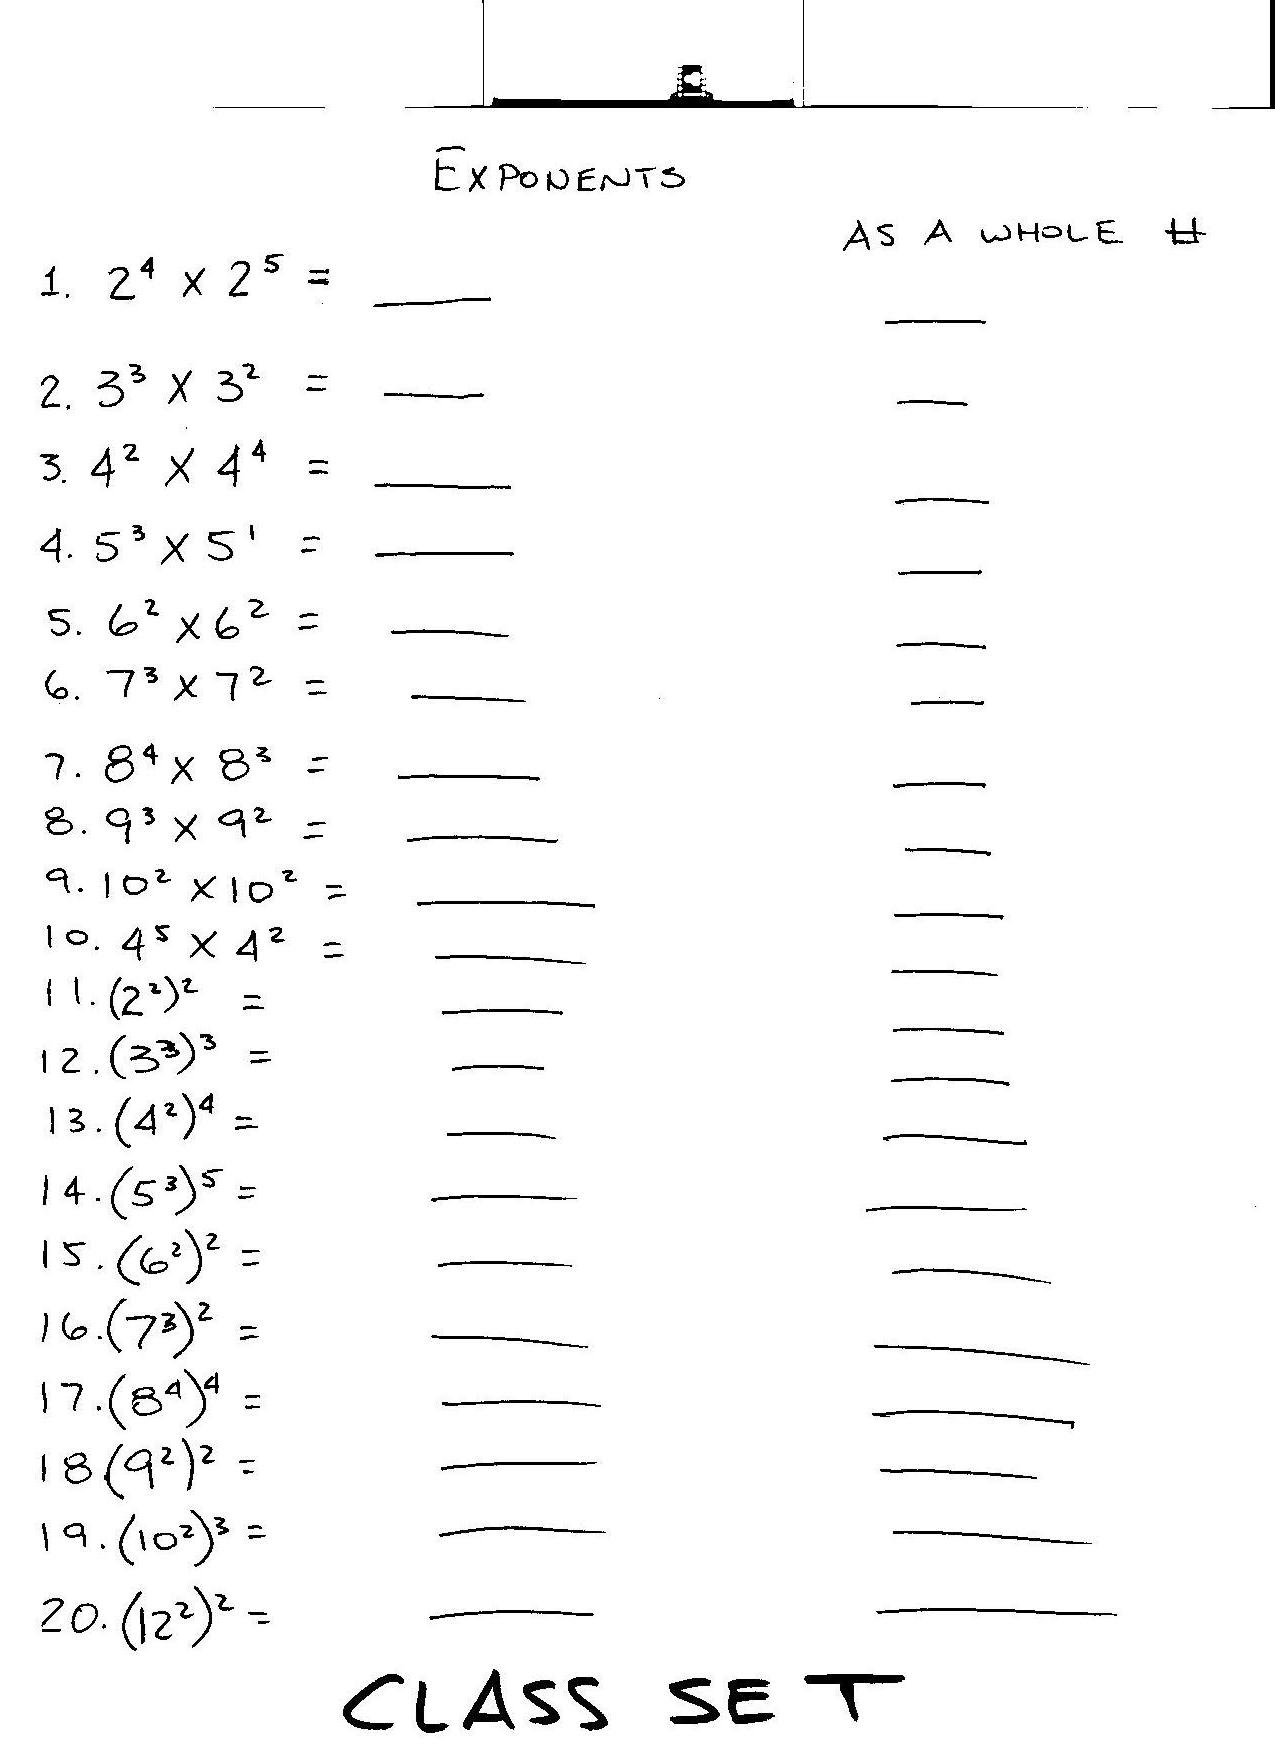 10 Best Images of Exponents Rules Worksheet - 8th Grade ...